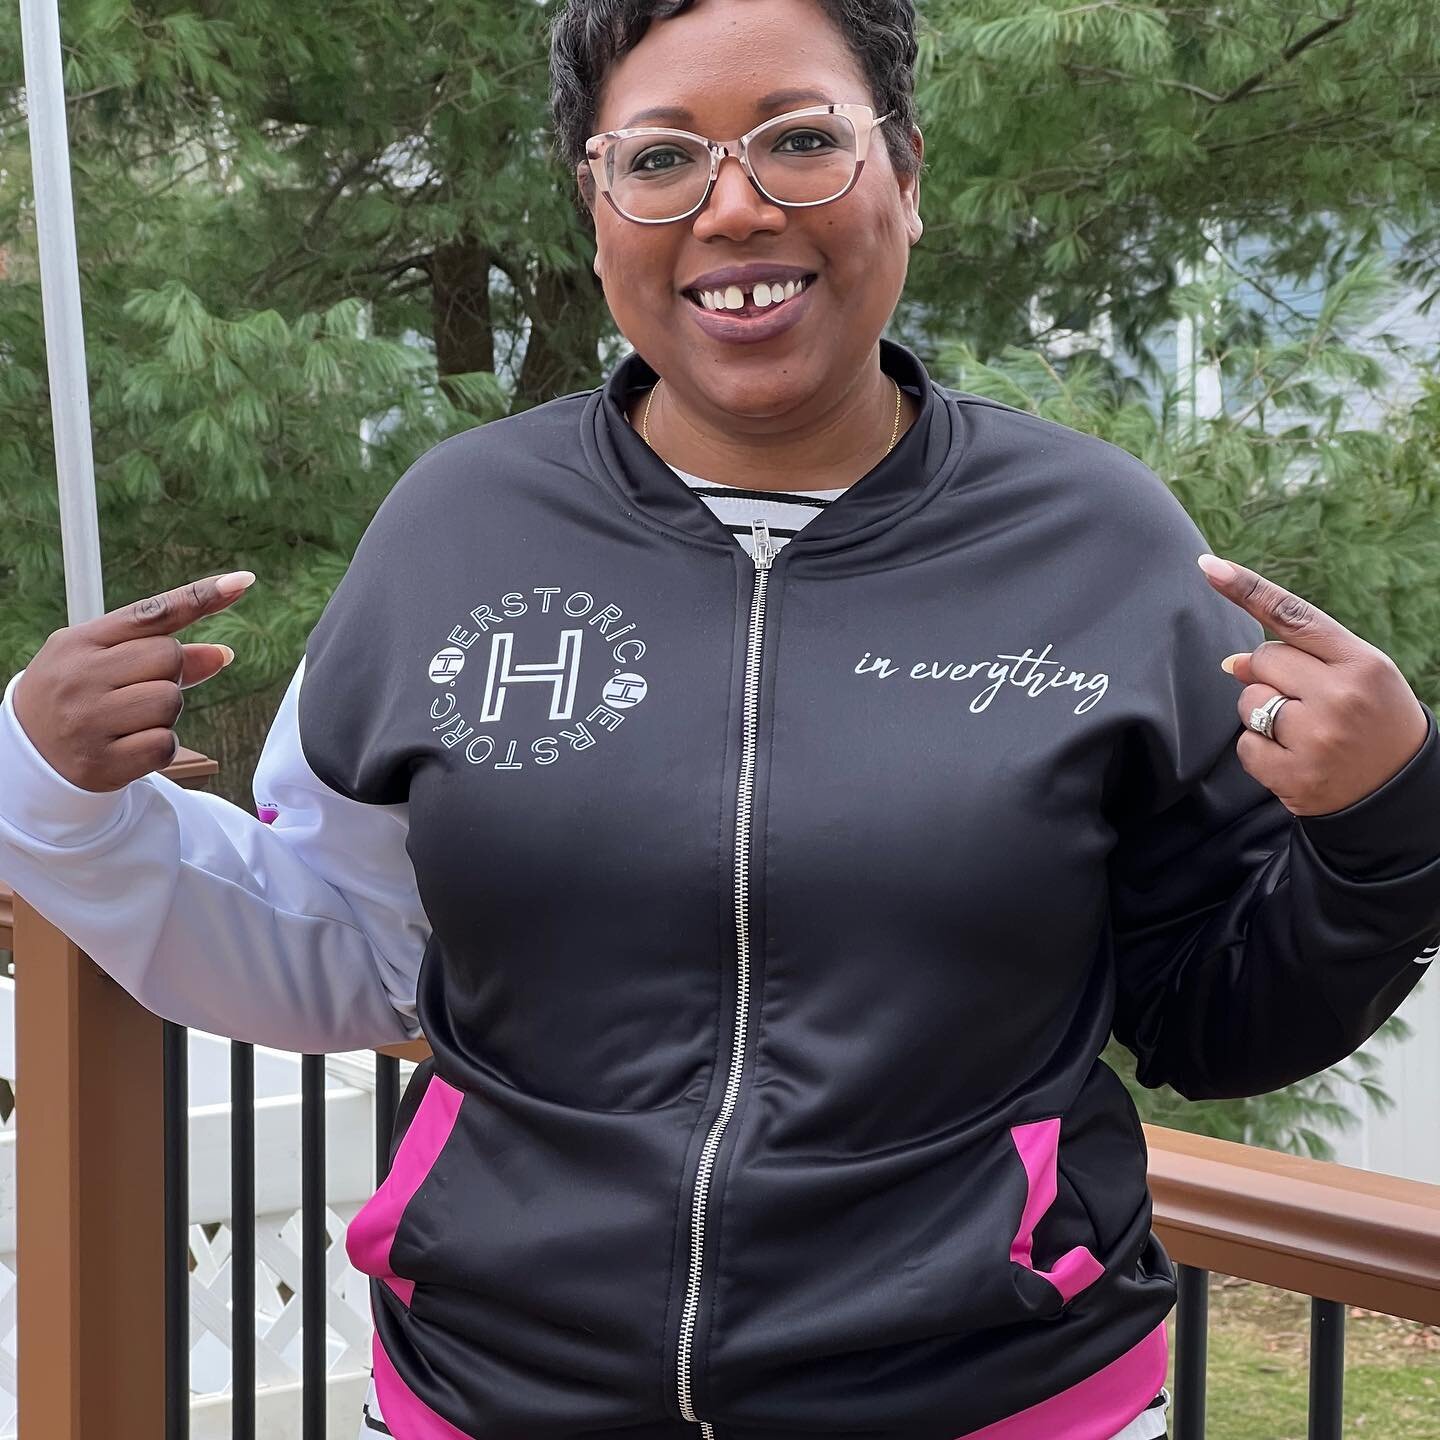 Look what was delivered on the Lord&rsquo;s Day in this Women&rsquo;s HERstory Month! Thank you @lesleyfmcclendon for my custom @herstoriclife bomber jacket. I love, love, love it! #reverenddonnao #inspiringcreativityinlifeandministry #herstoricineve